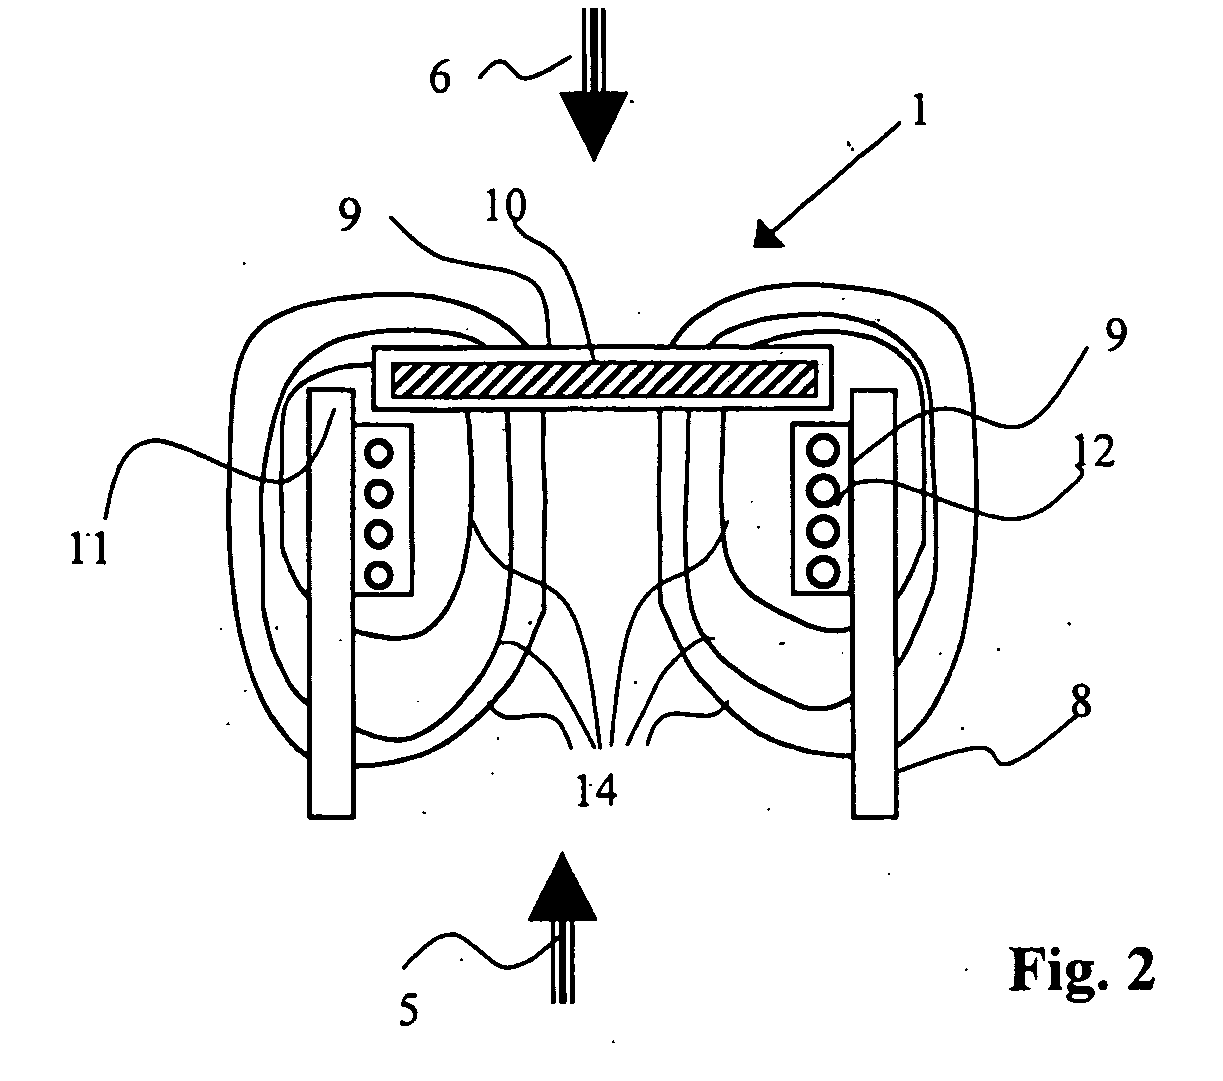 Device for determining a condition of flow in a respiration system